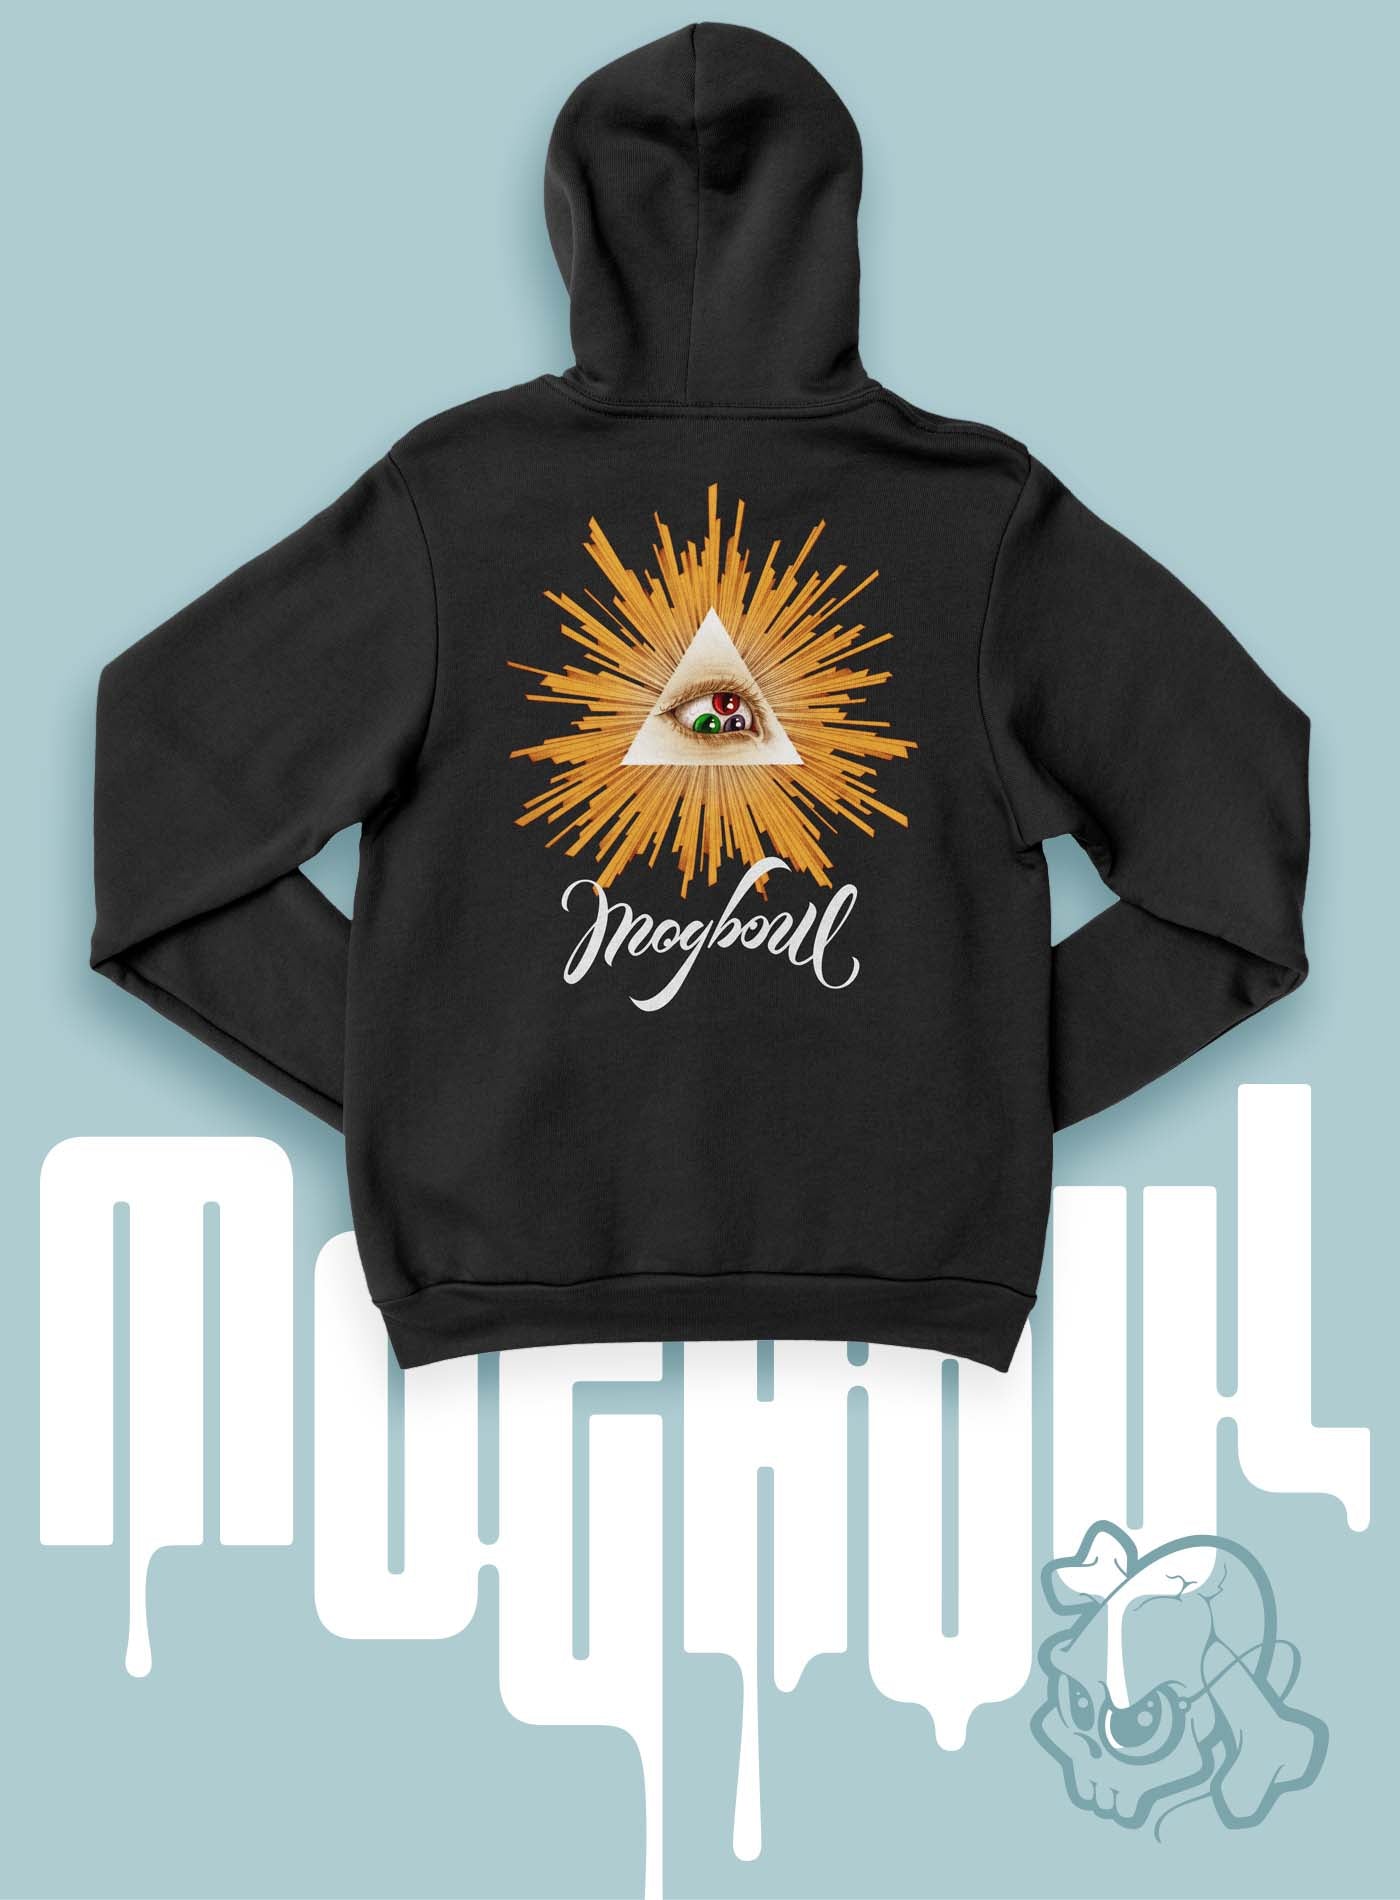 man modeling a black unisex hoodie featuring a back print of a reinterpretation of the Horus pyramid and Moghoul ambigram logo by G.M. Meave.